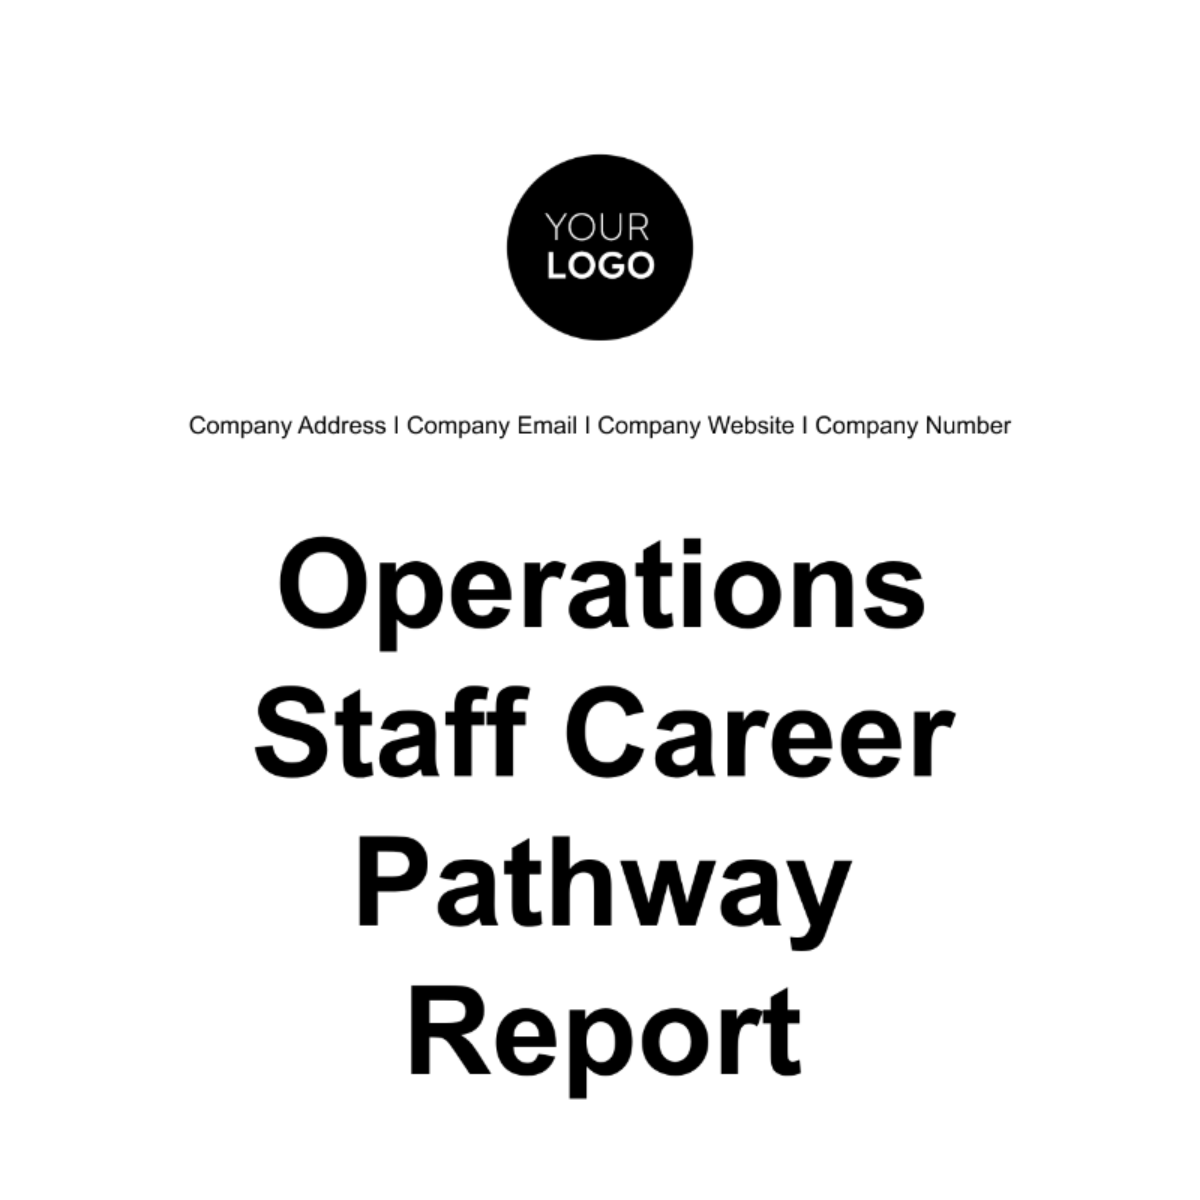 Operations Staff Career Pathway Report Template